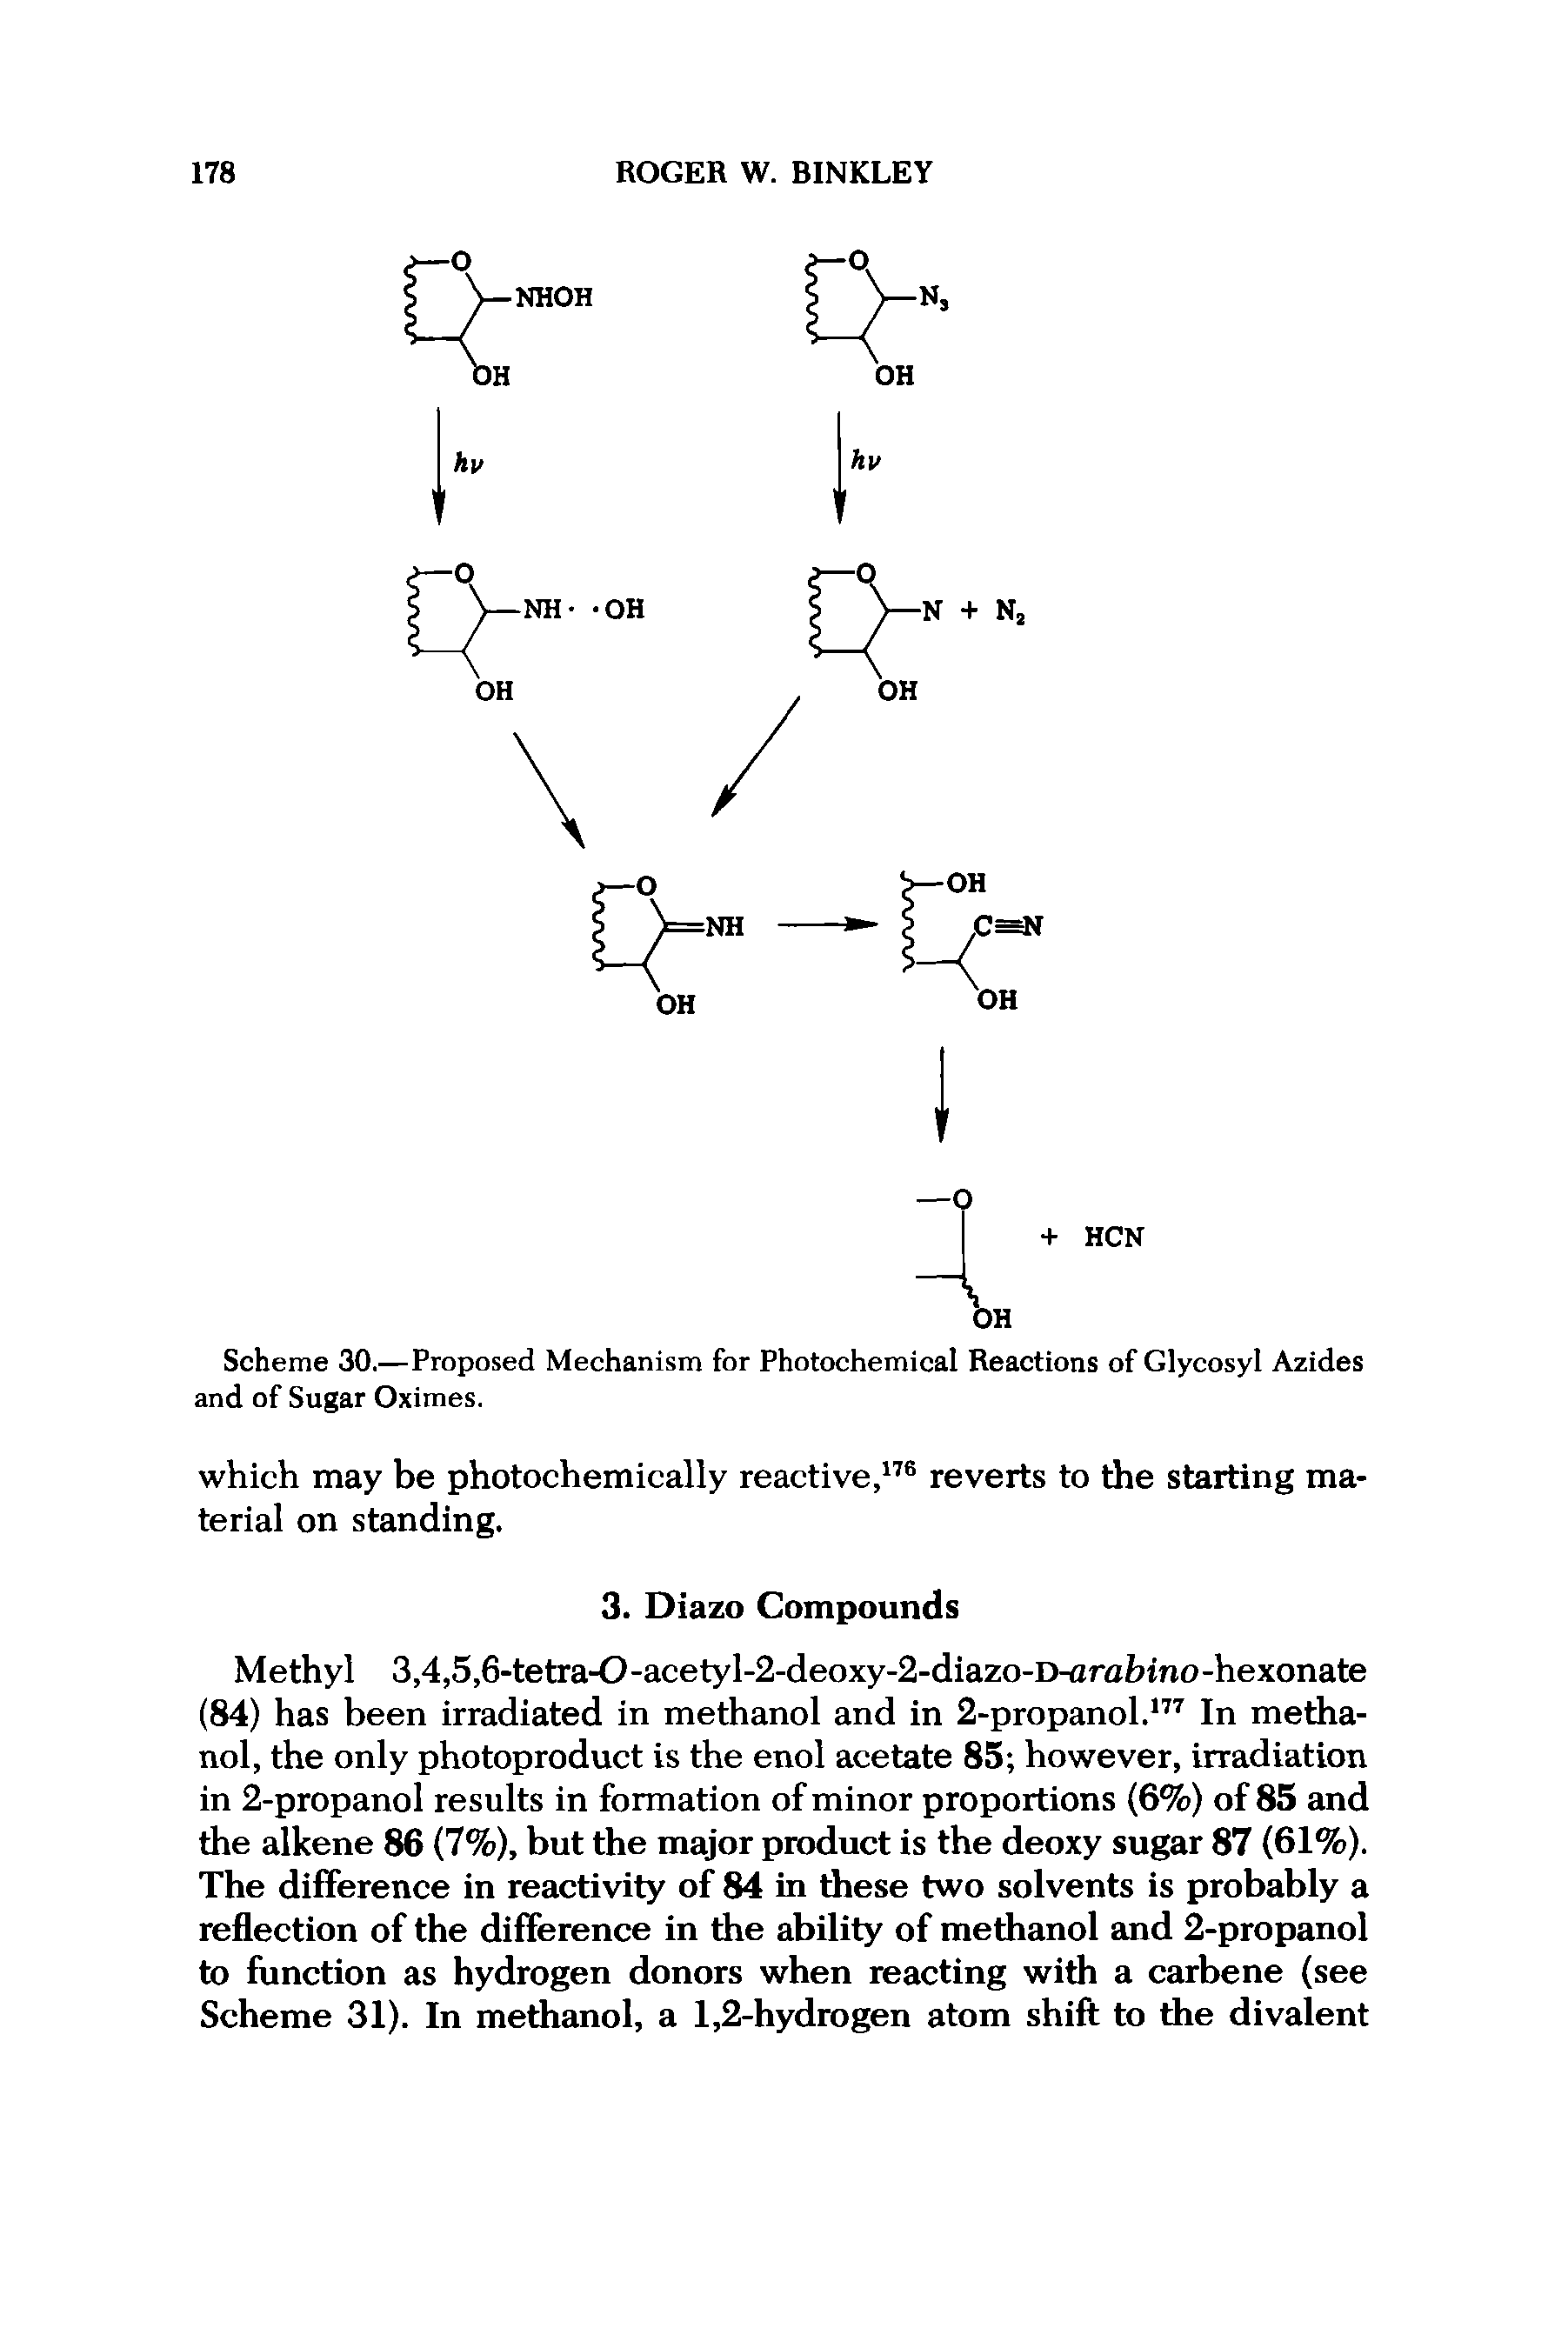 Scheme 30.—Proposed Mechanism for Photochemical Reactions of Glycosyl Azides and of Sugar Oximes.